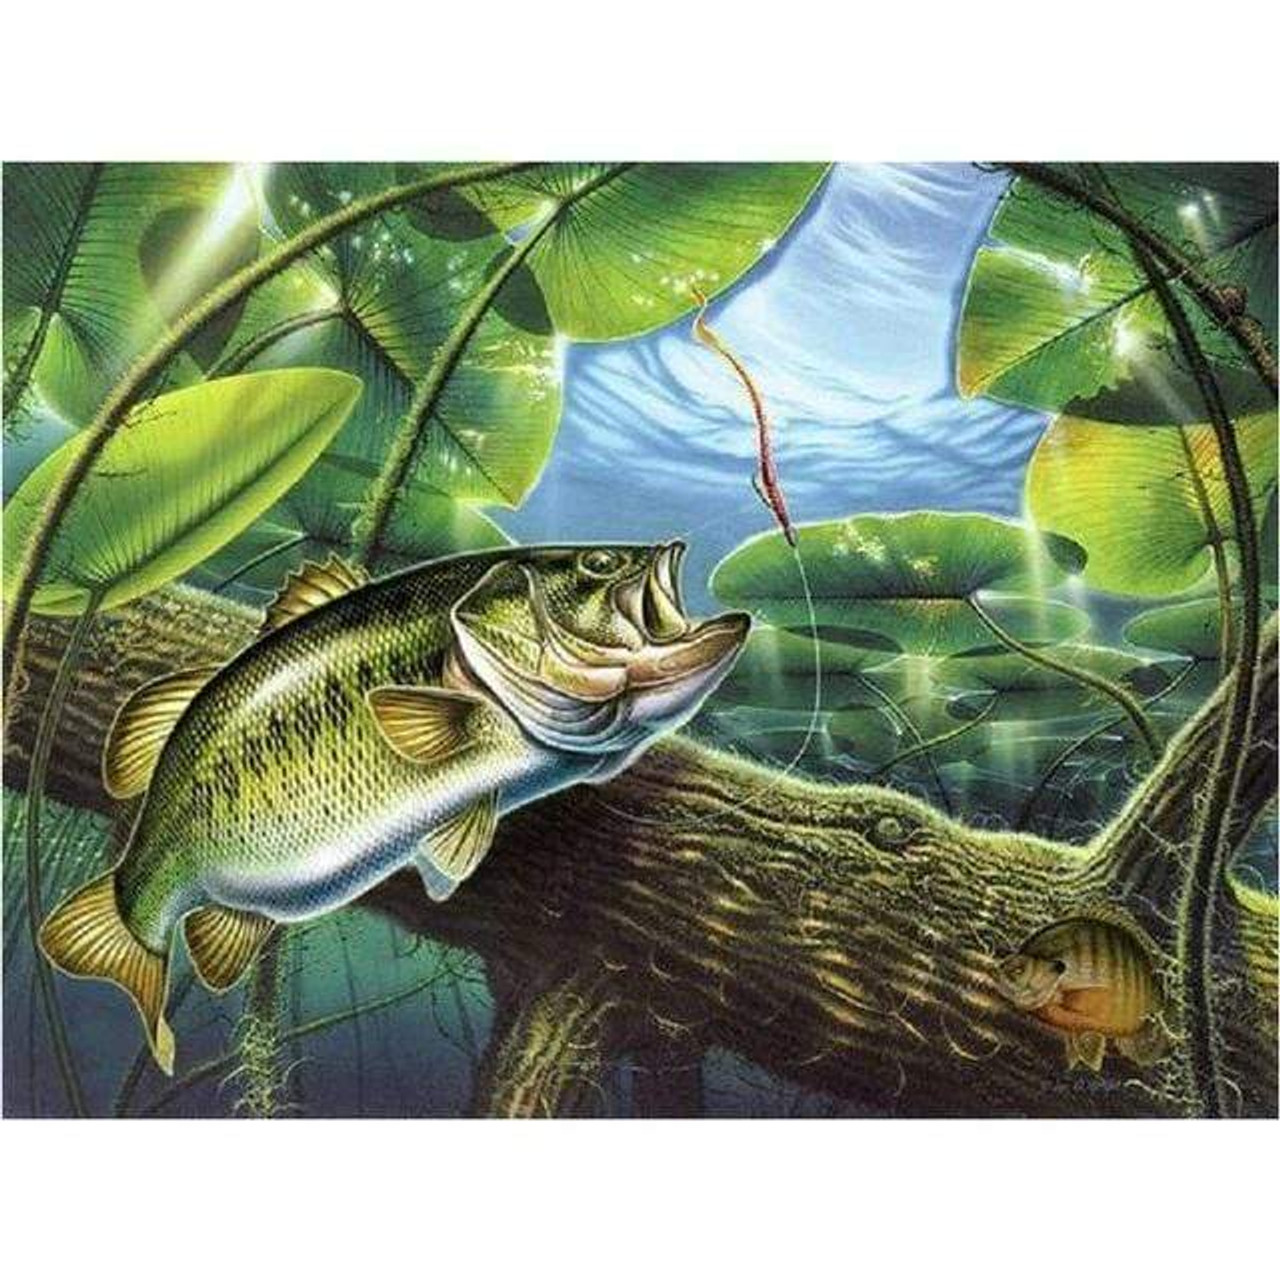 5D Diamond Painting Fish in the Pond Kit